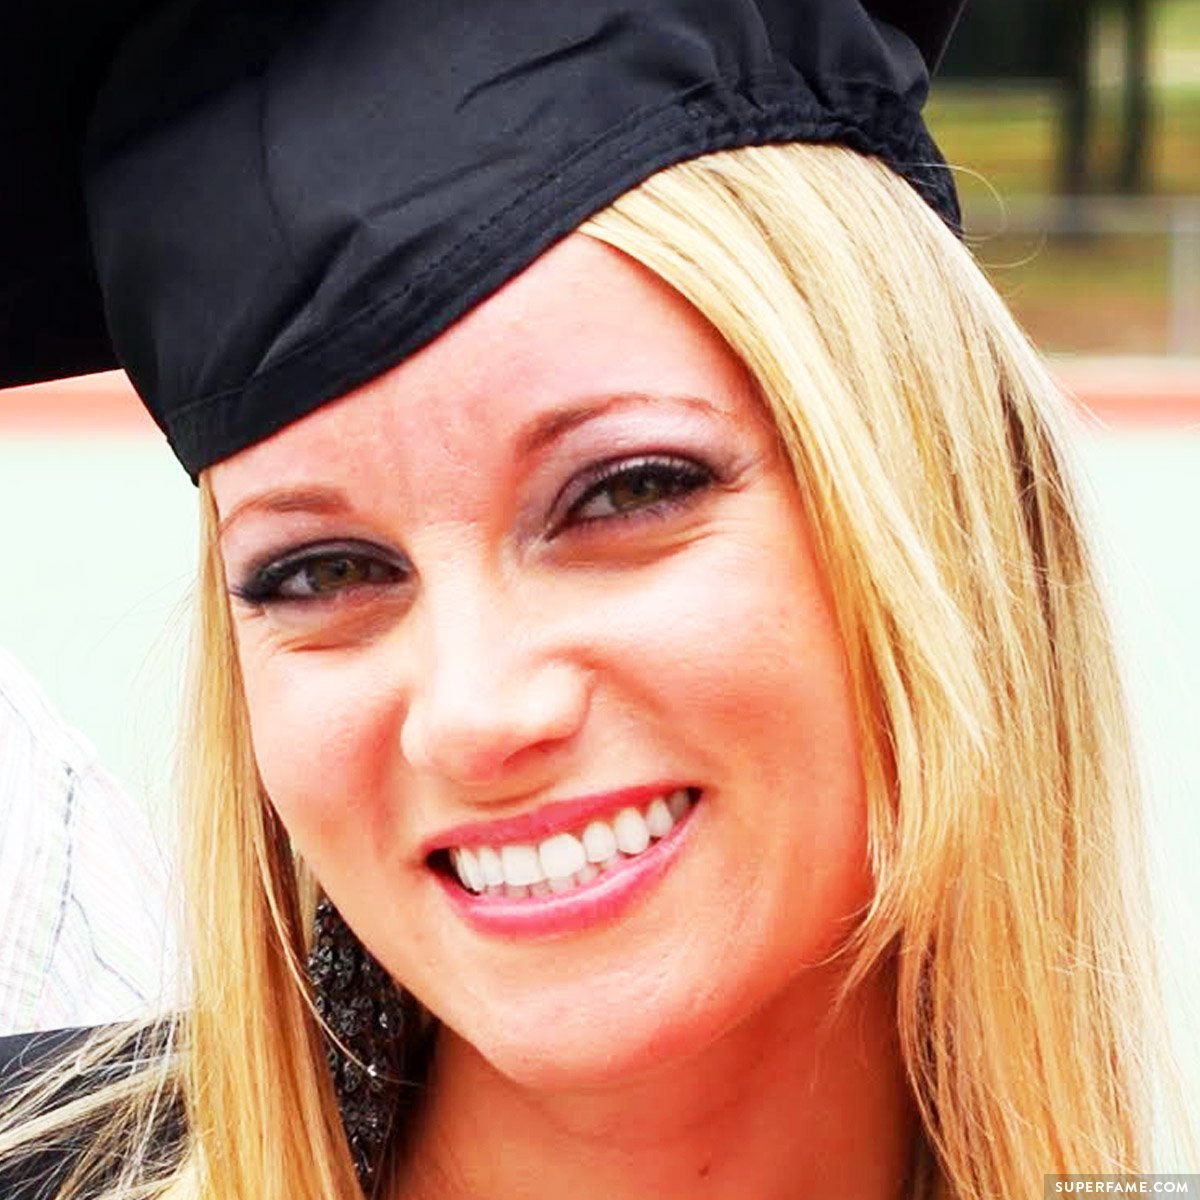 Jeana from PvP during her graduation. 